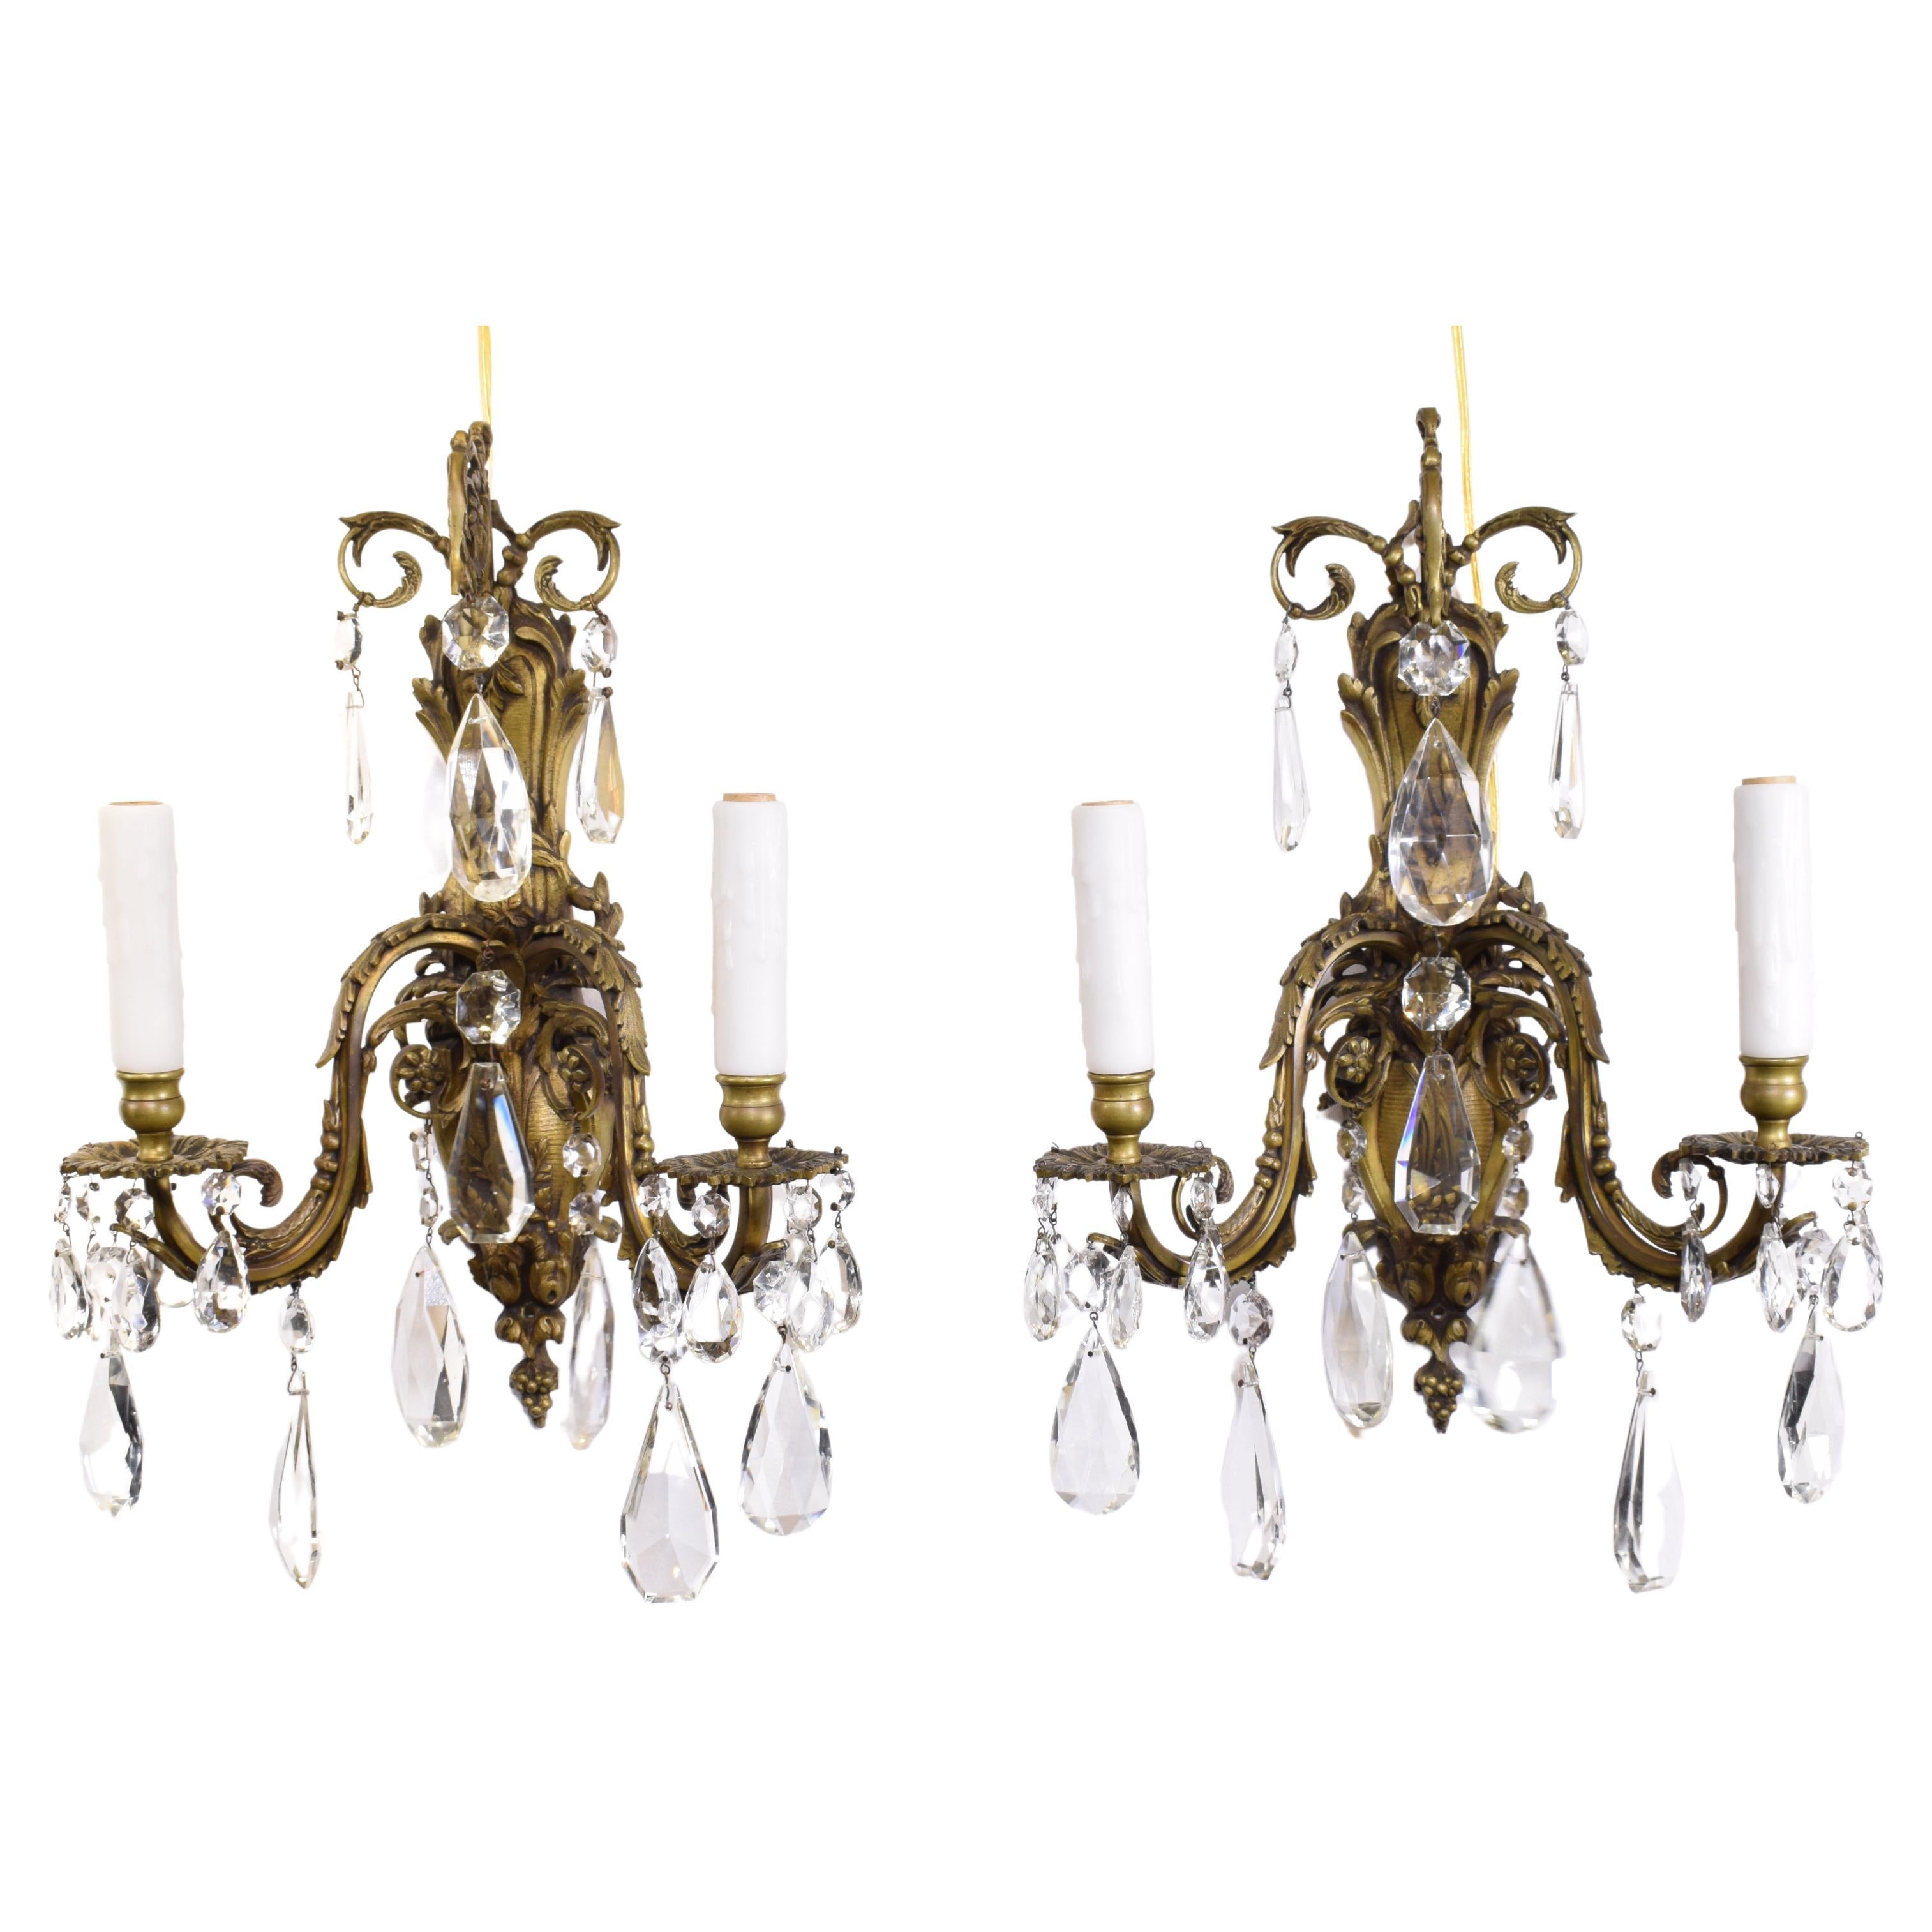 A Fine Pair Of Gilt Bronze & Crystal Wall Sconces